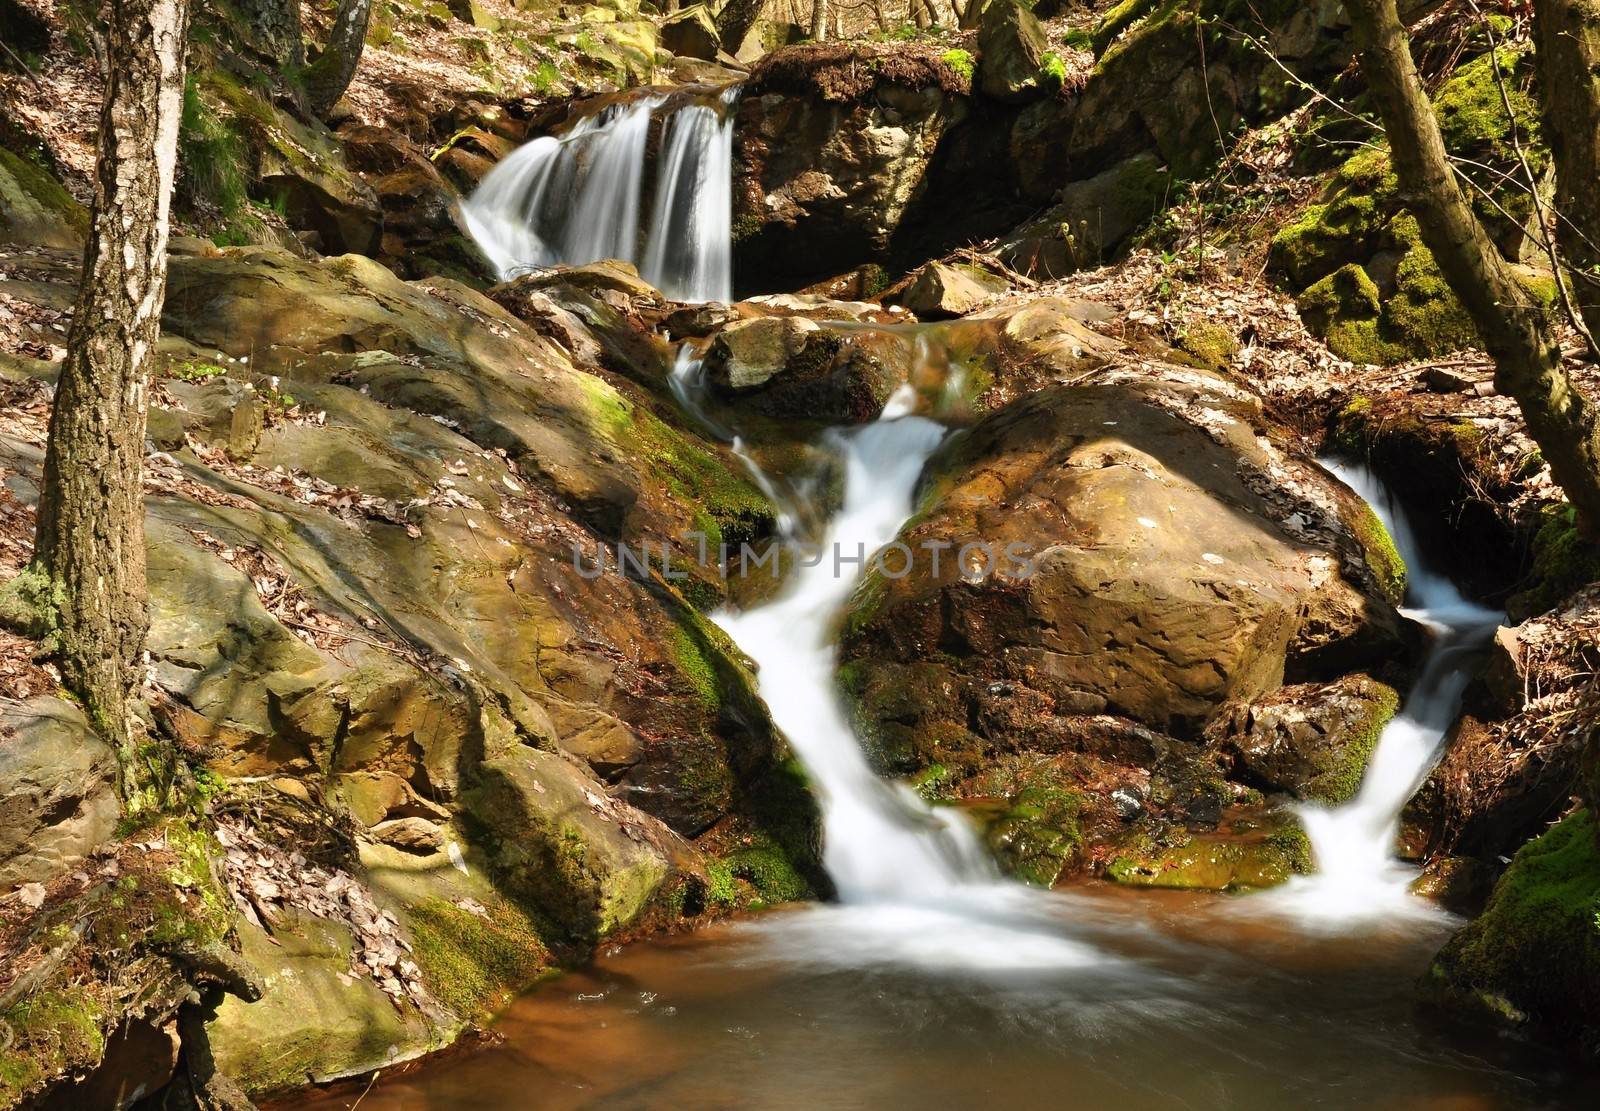 A small river flows through a wild landscape with rocks